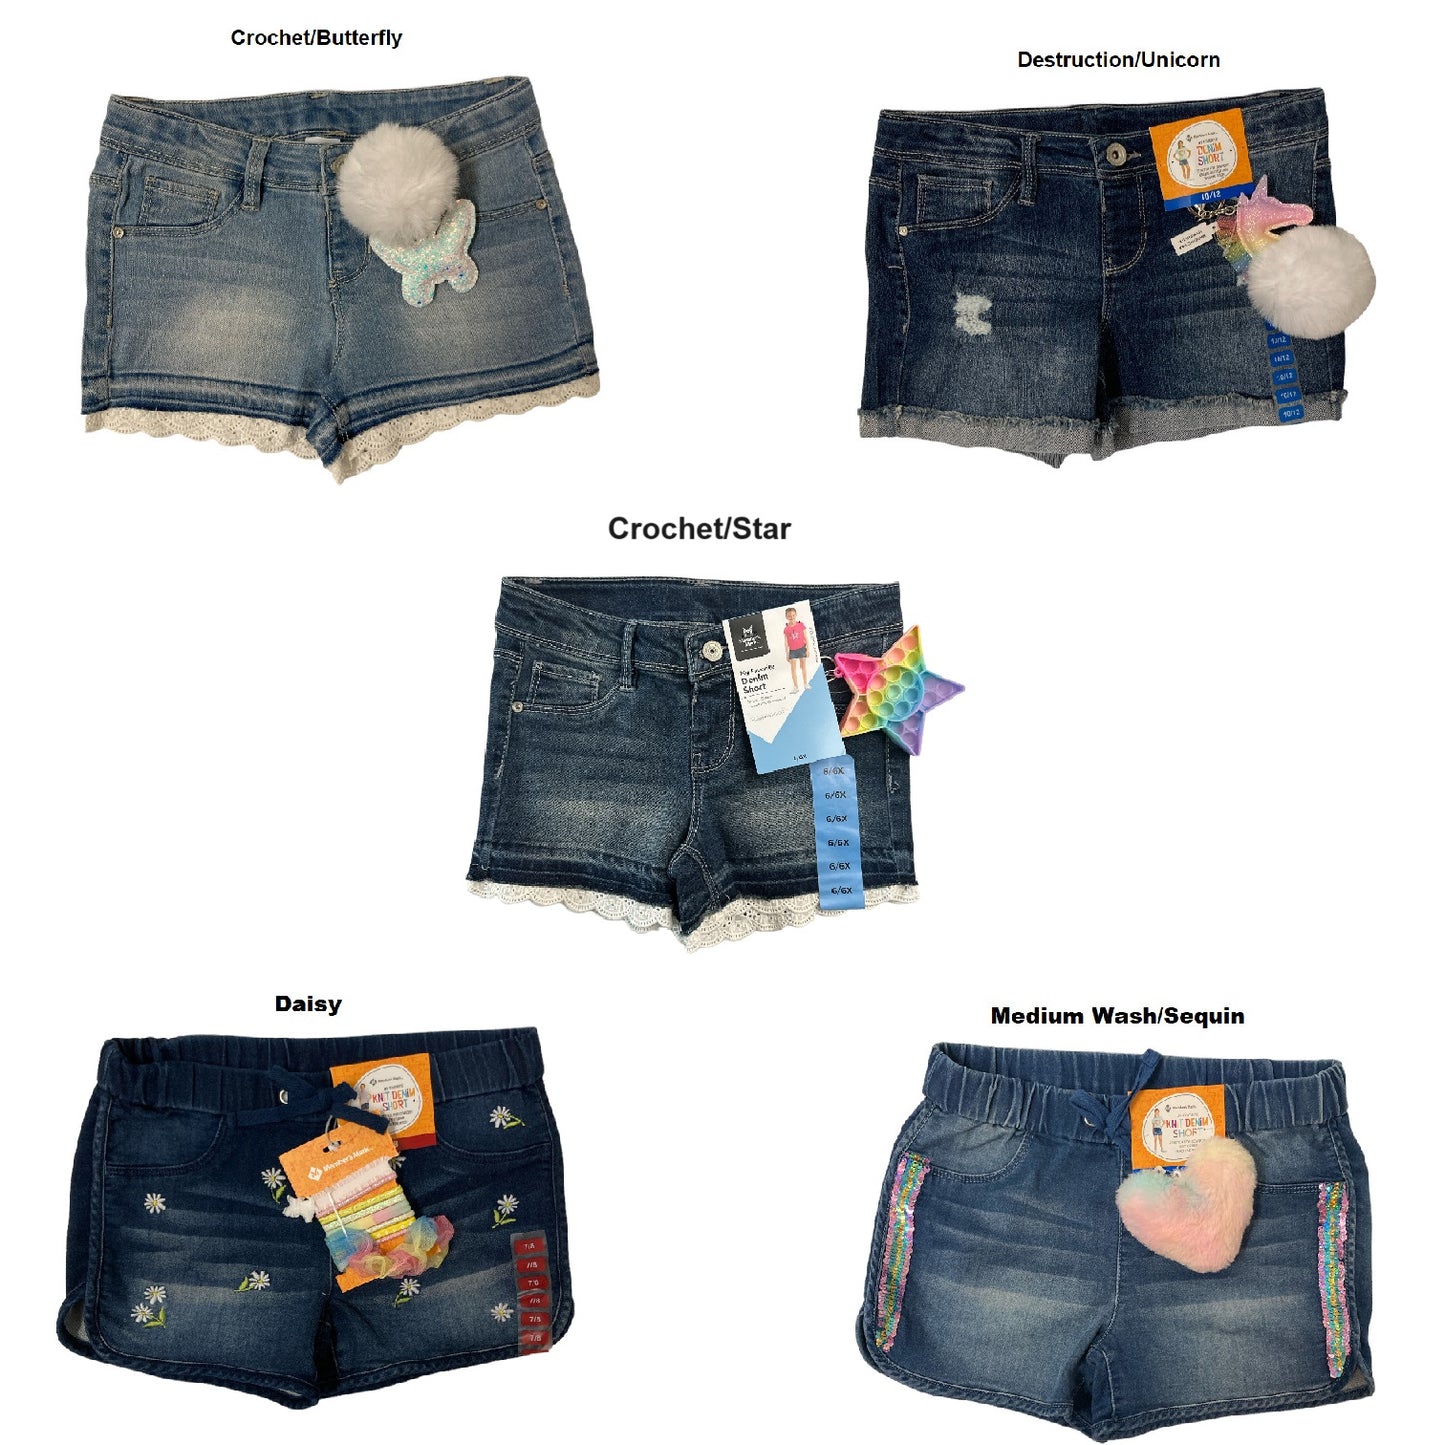 Member's Mark Girl's Denim Short With Removable Accessory